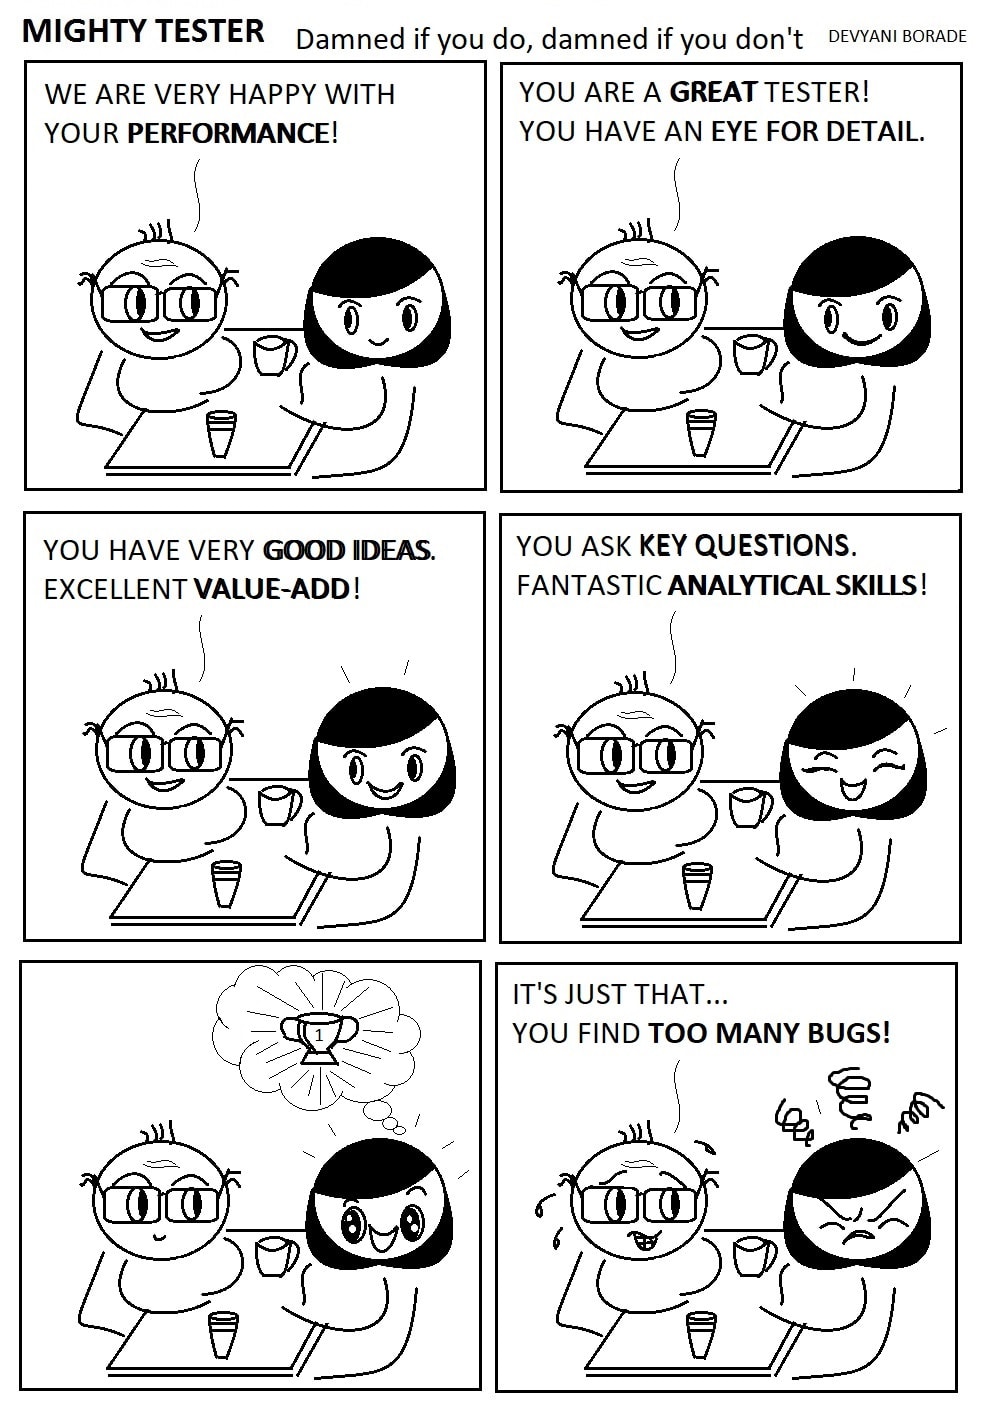 Comic strip: We are very happy with your performance! You are a great tester! You have an eye for detail. You have good ideas, excellent value-add! You ask key questions. Fantastic analytical skills! It's just that...You find too many bugs! 